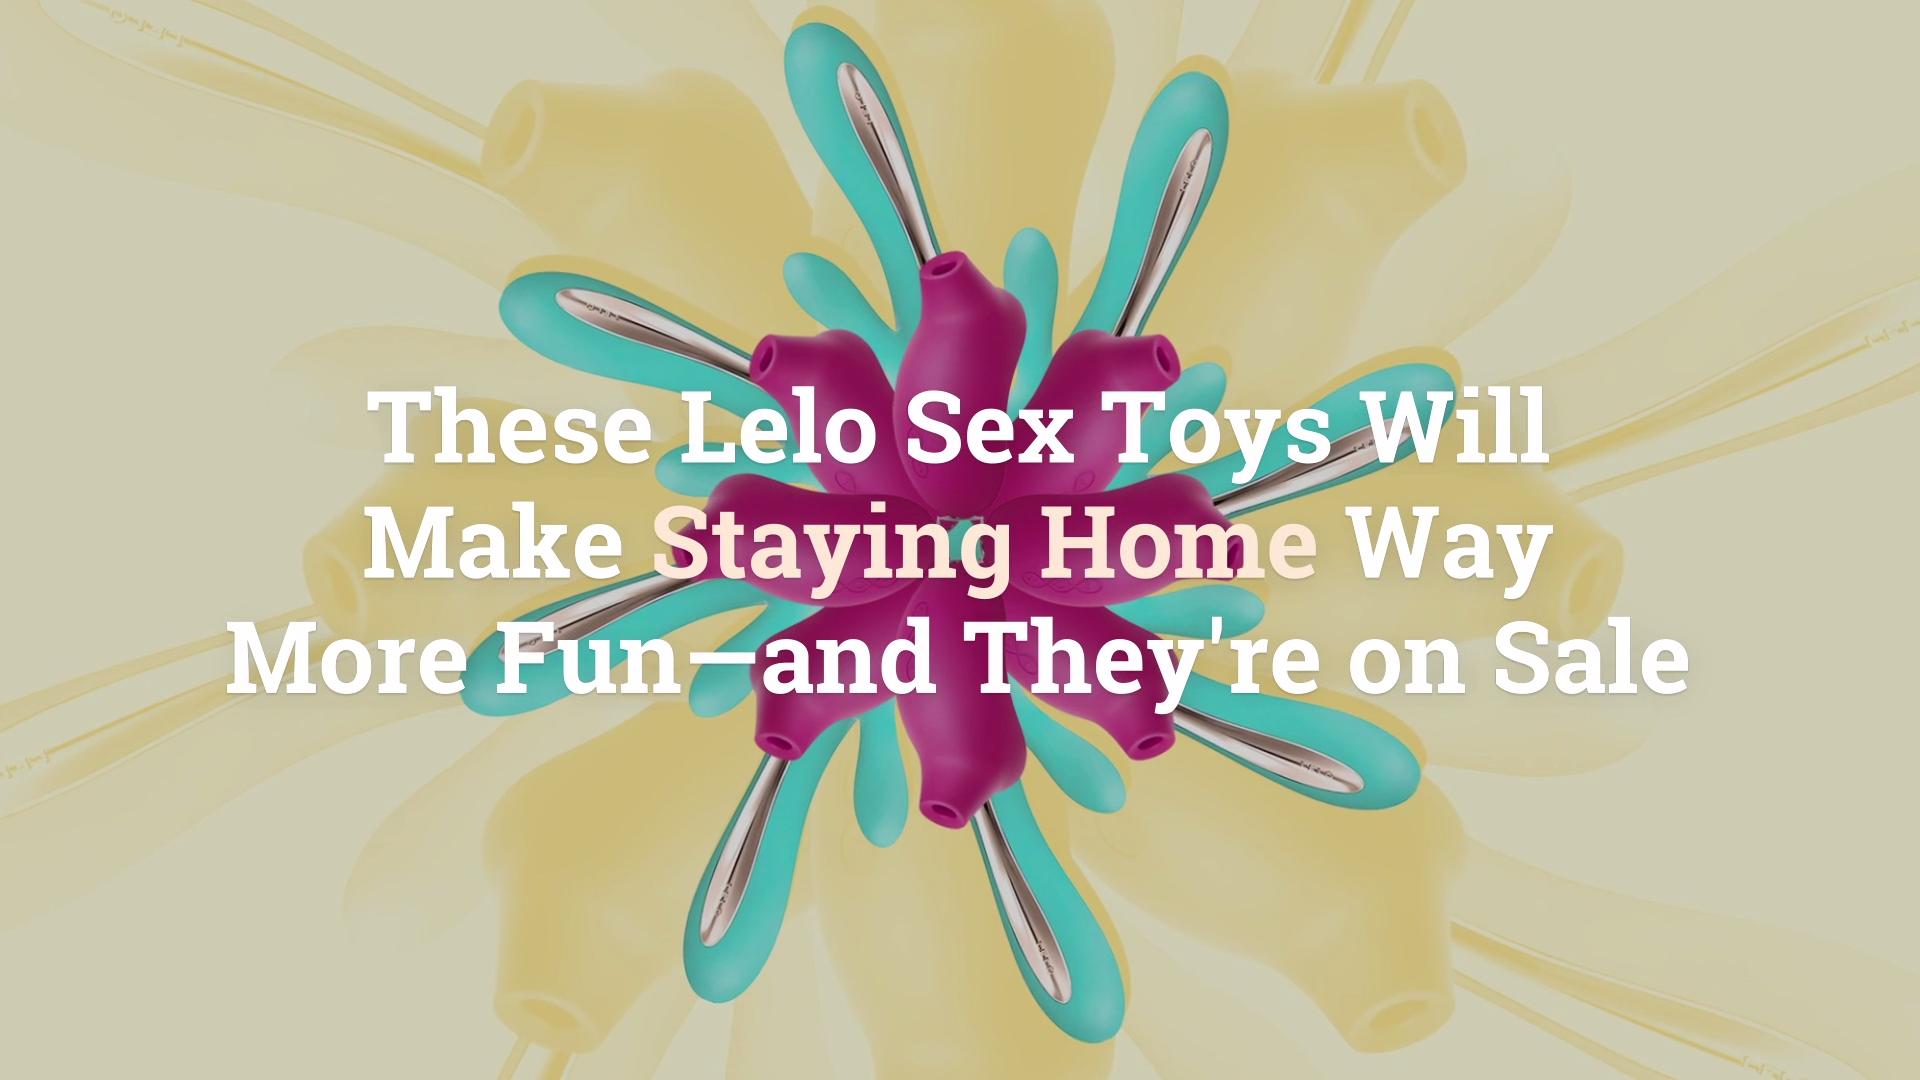 These Lelo Sex Toys Will Make Staying Home Way More Fun—and Theyre on Sale picture